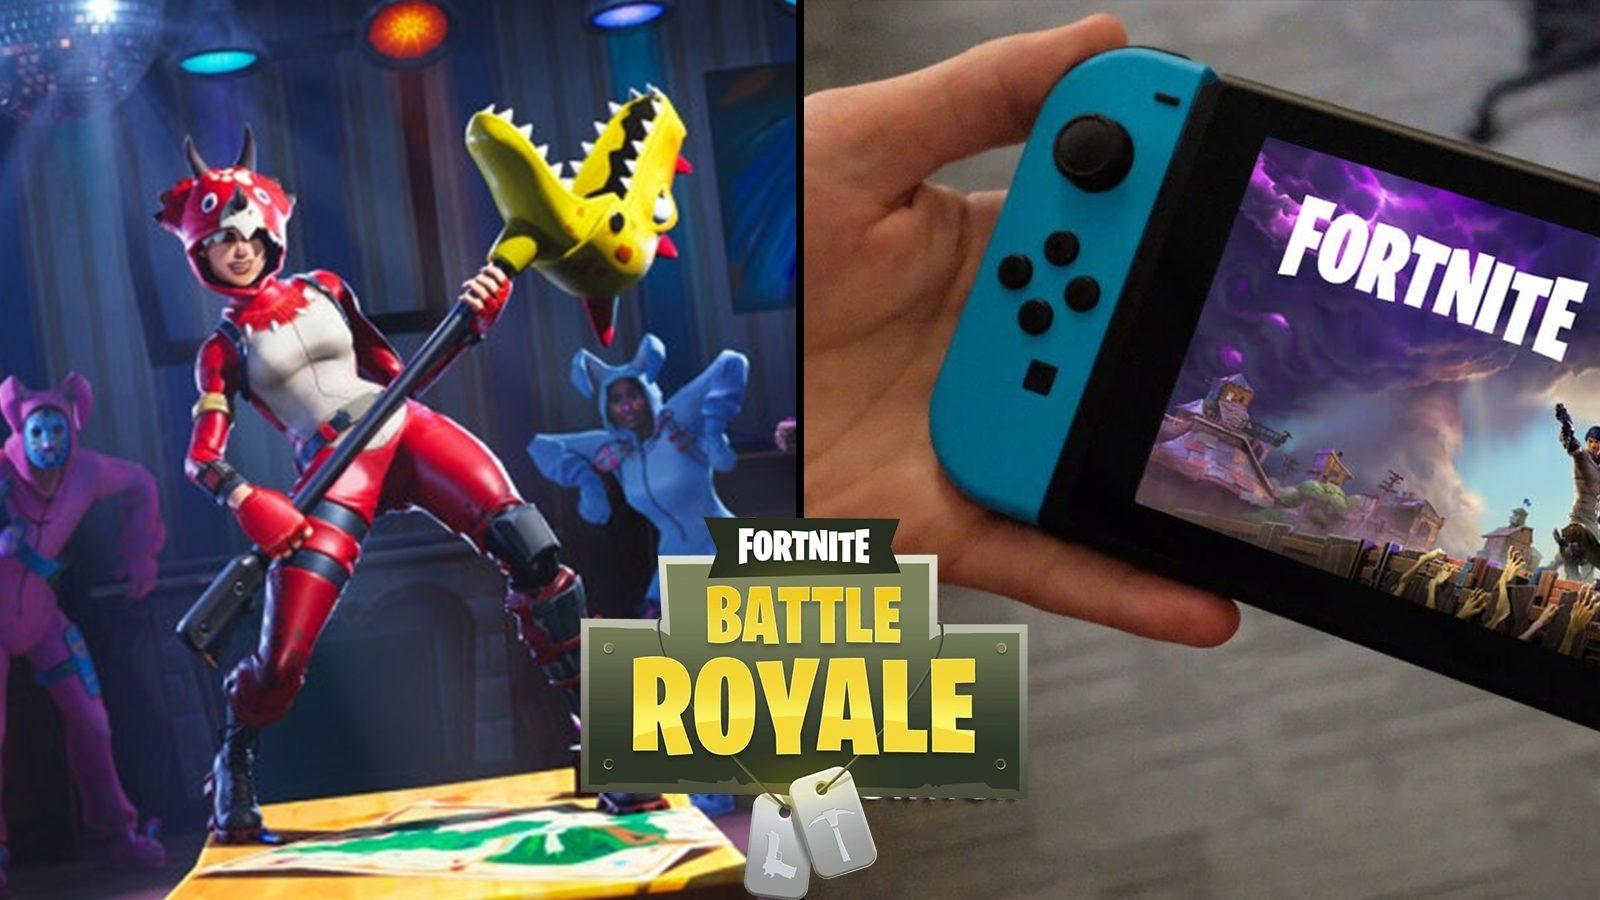 Just got a switch yesterday! Any good free games besides Fortnite